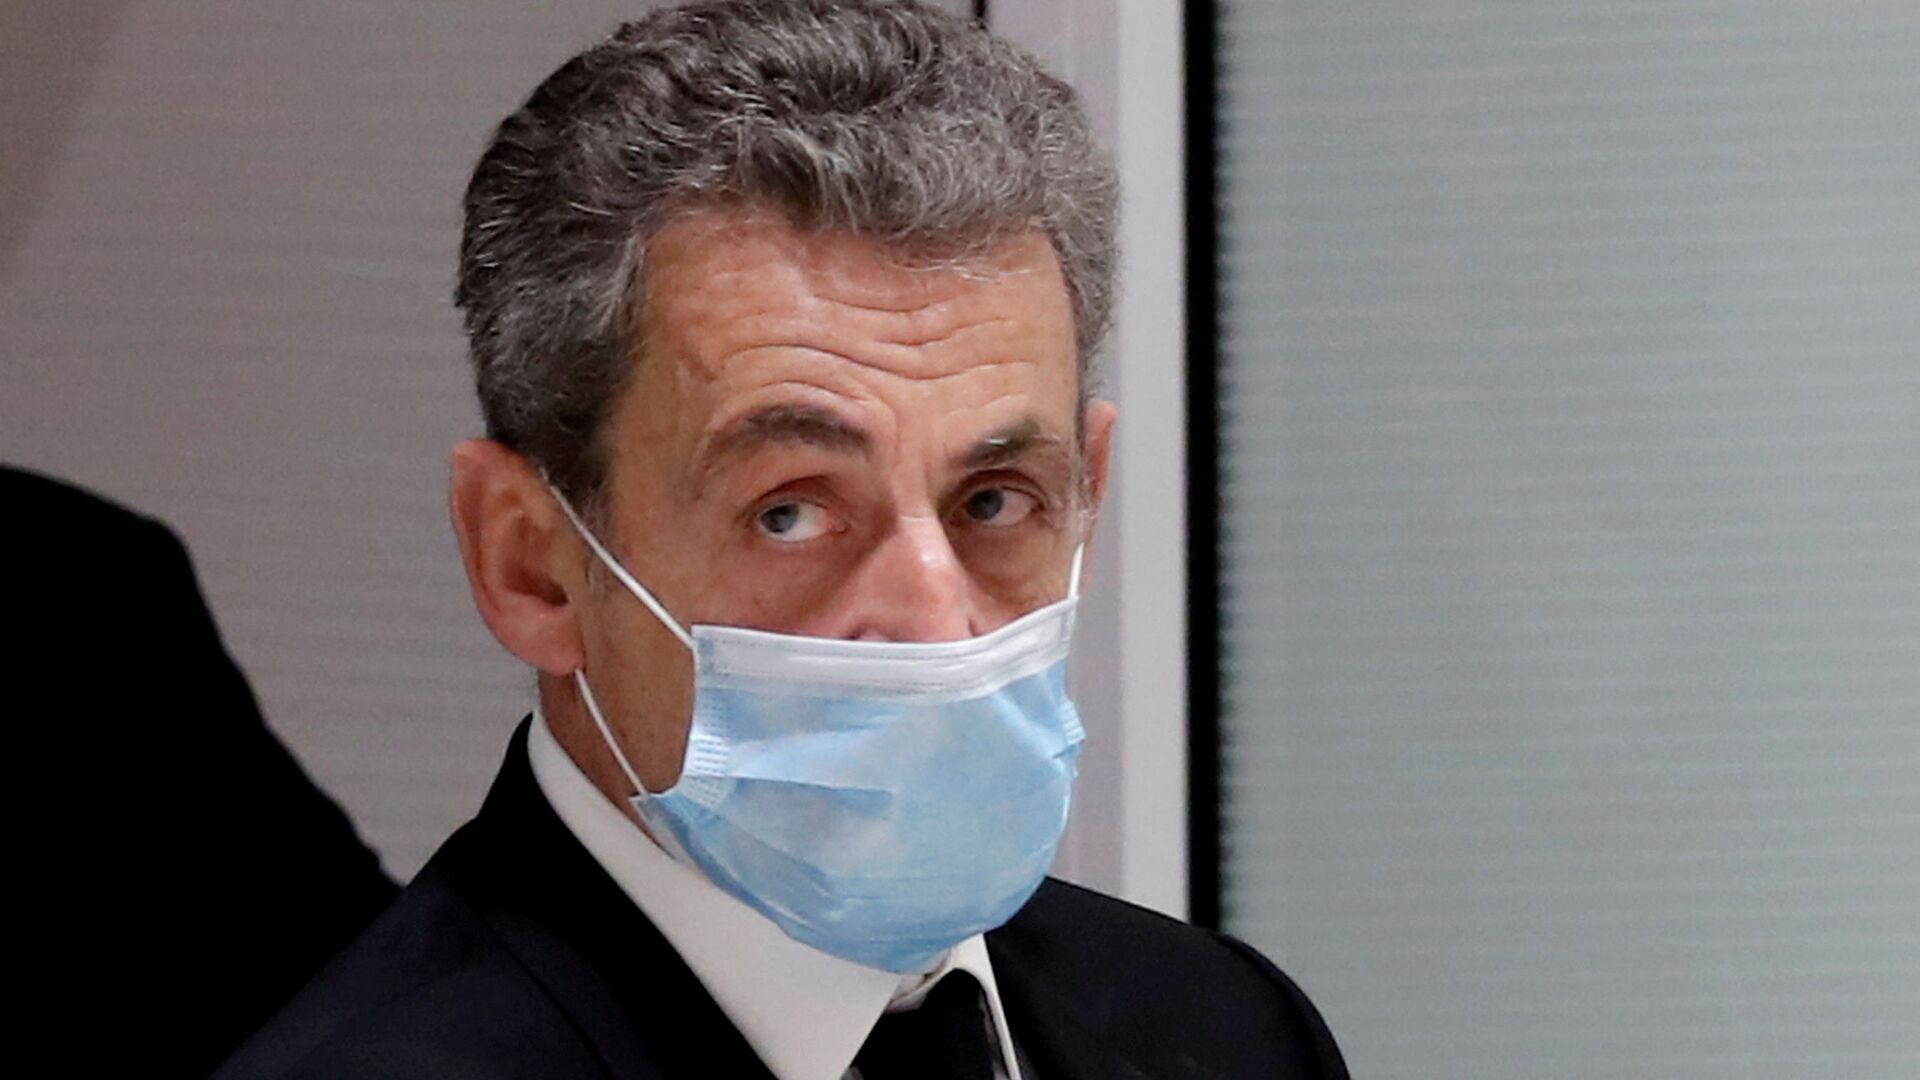 Former French President Nicolas Sarkozy leaves the courtroom during his trial on charges of corruption and influence peddling, at Paris courthouse, France, December 7, 2020. REUTERS/Benoit Tessier/File Photo - Sputnik International, 1920, 01.03.2021